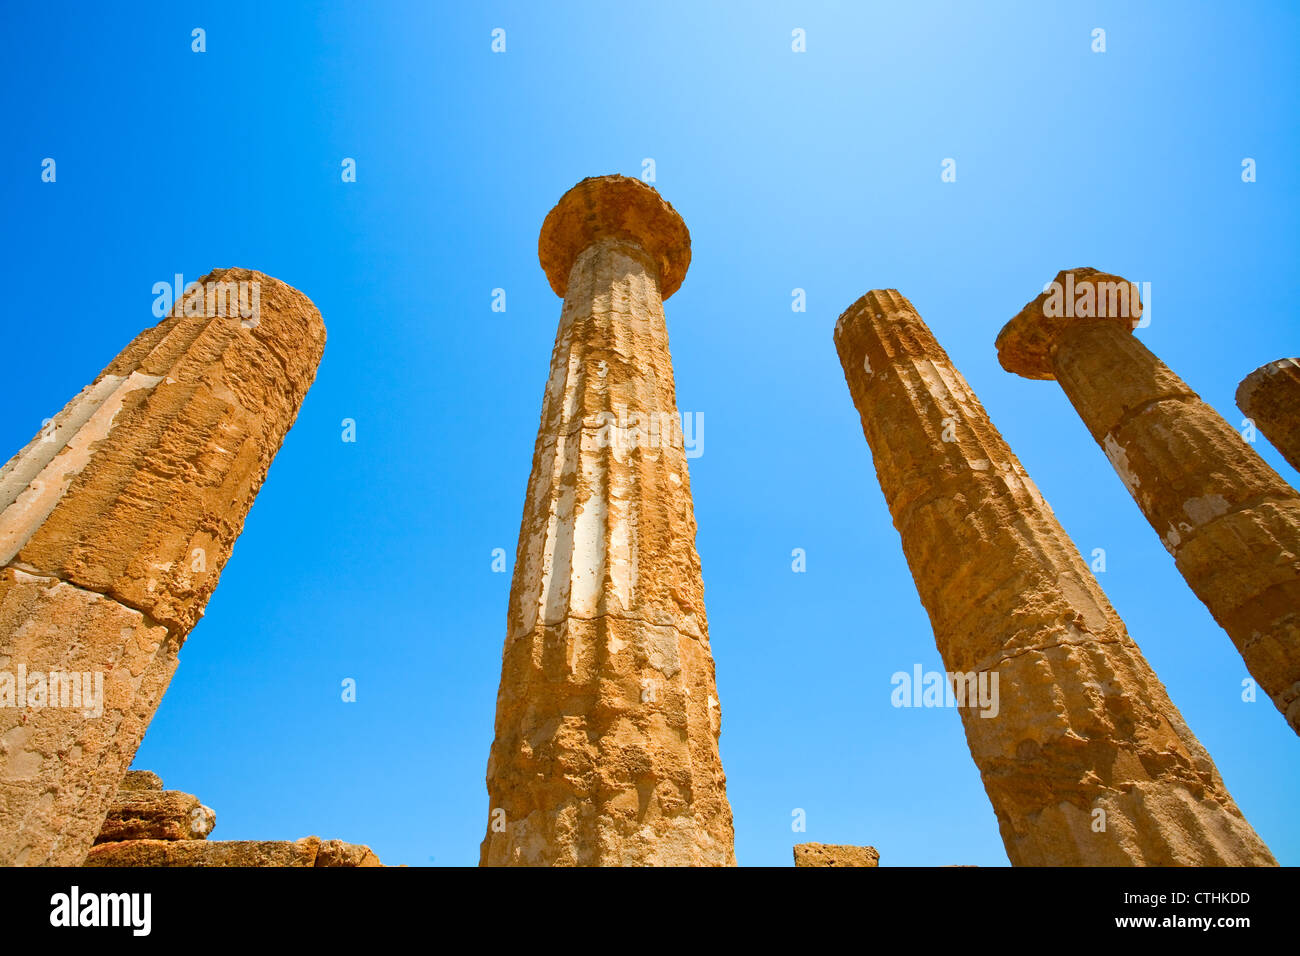 Dorian columns of Temple of Heracles in Valley of the Temples in Agrigento, Sicily Stock Photo